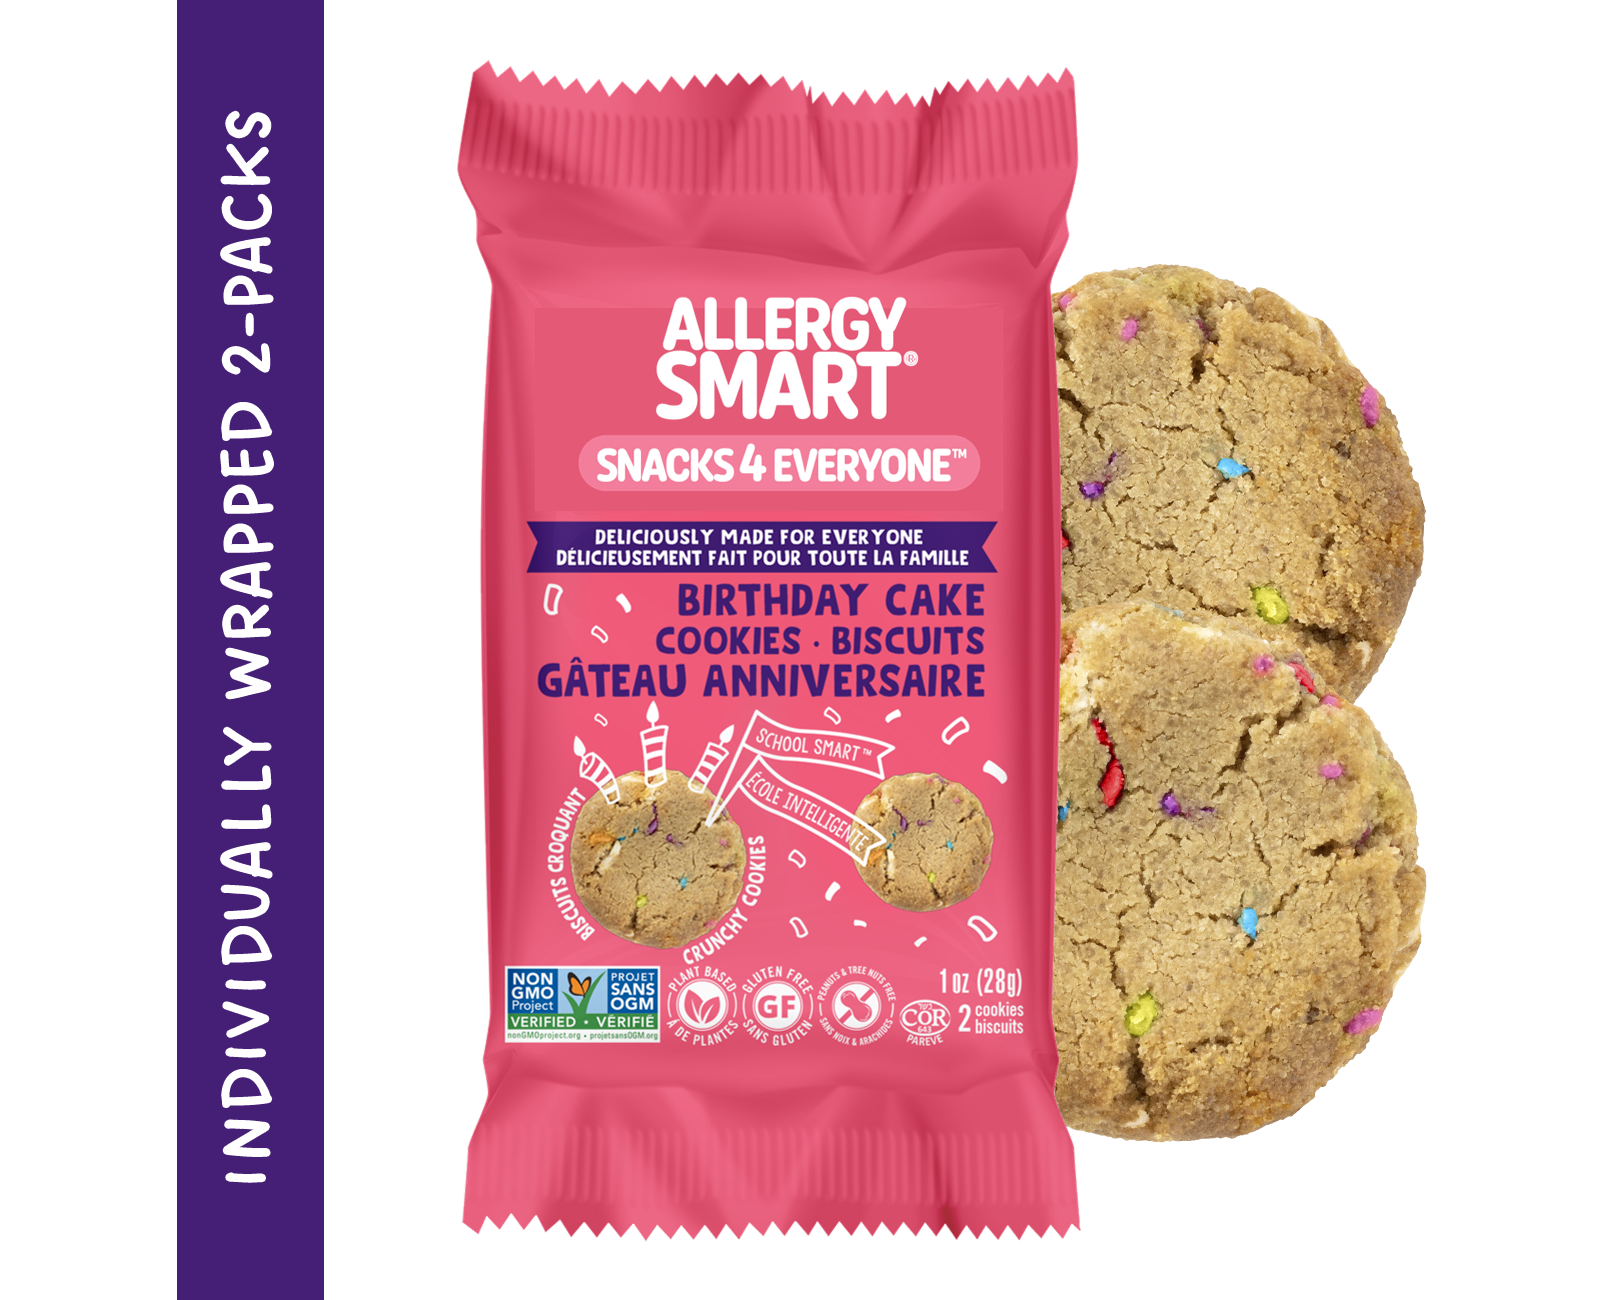 40 Individually Wrapped 2-Pack Cookies | Birthday Cake - AllergySmart - Green Gourmand Foods Inc.